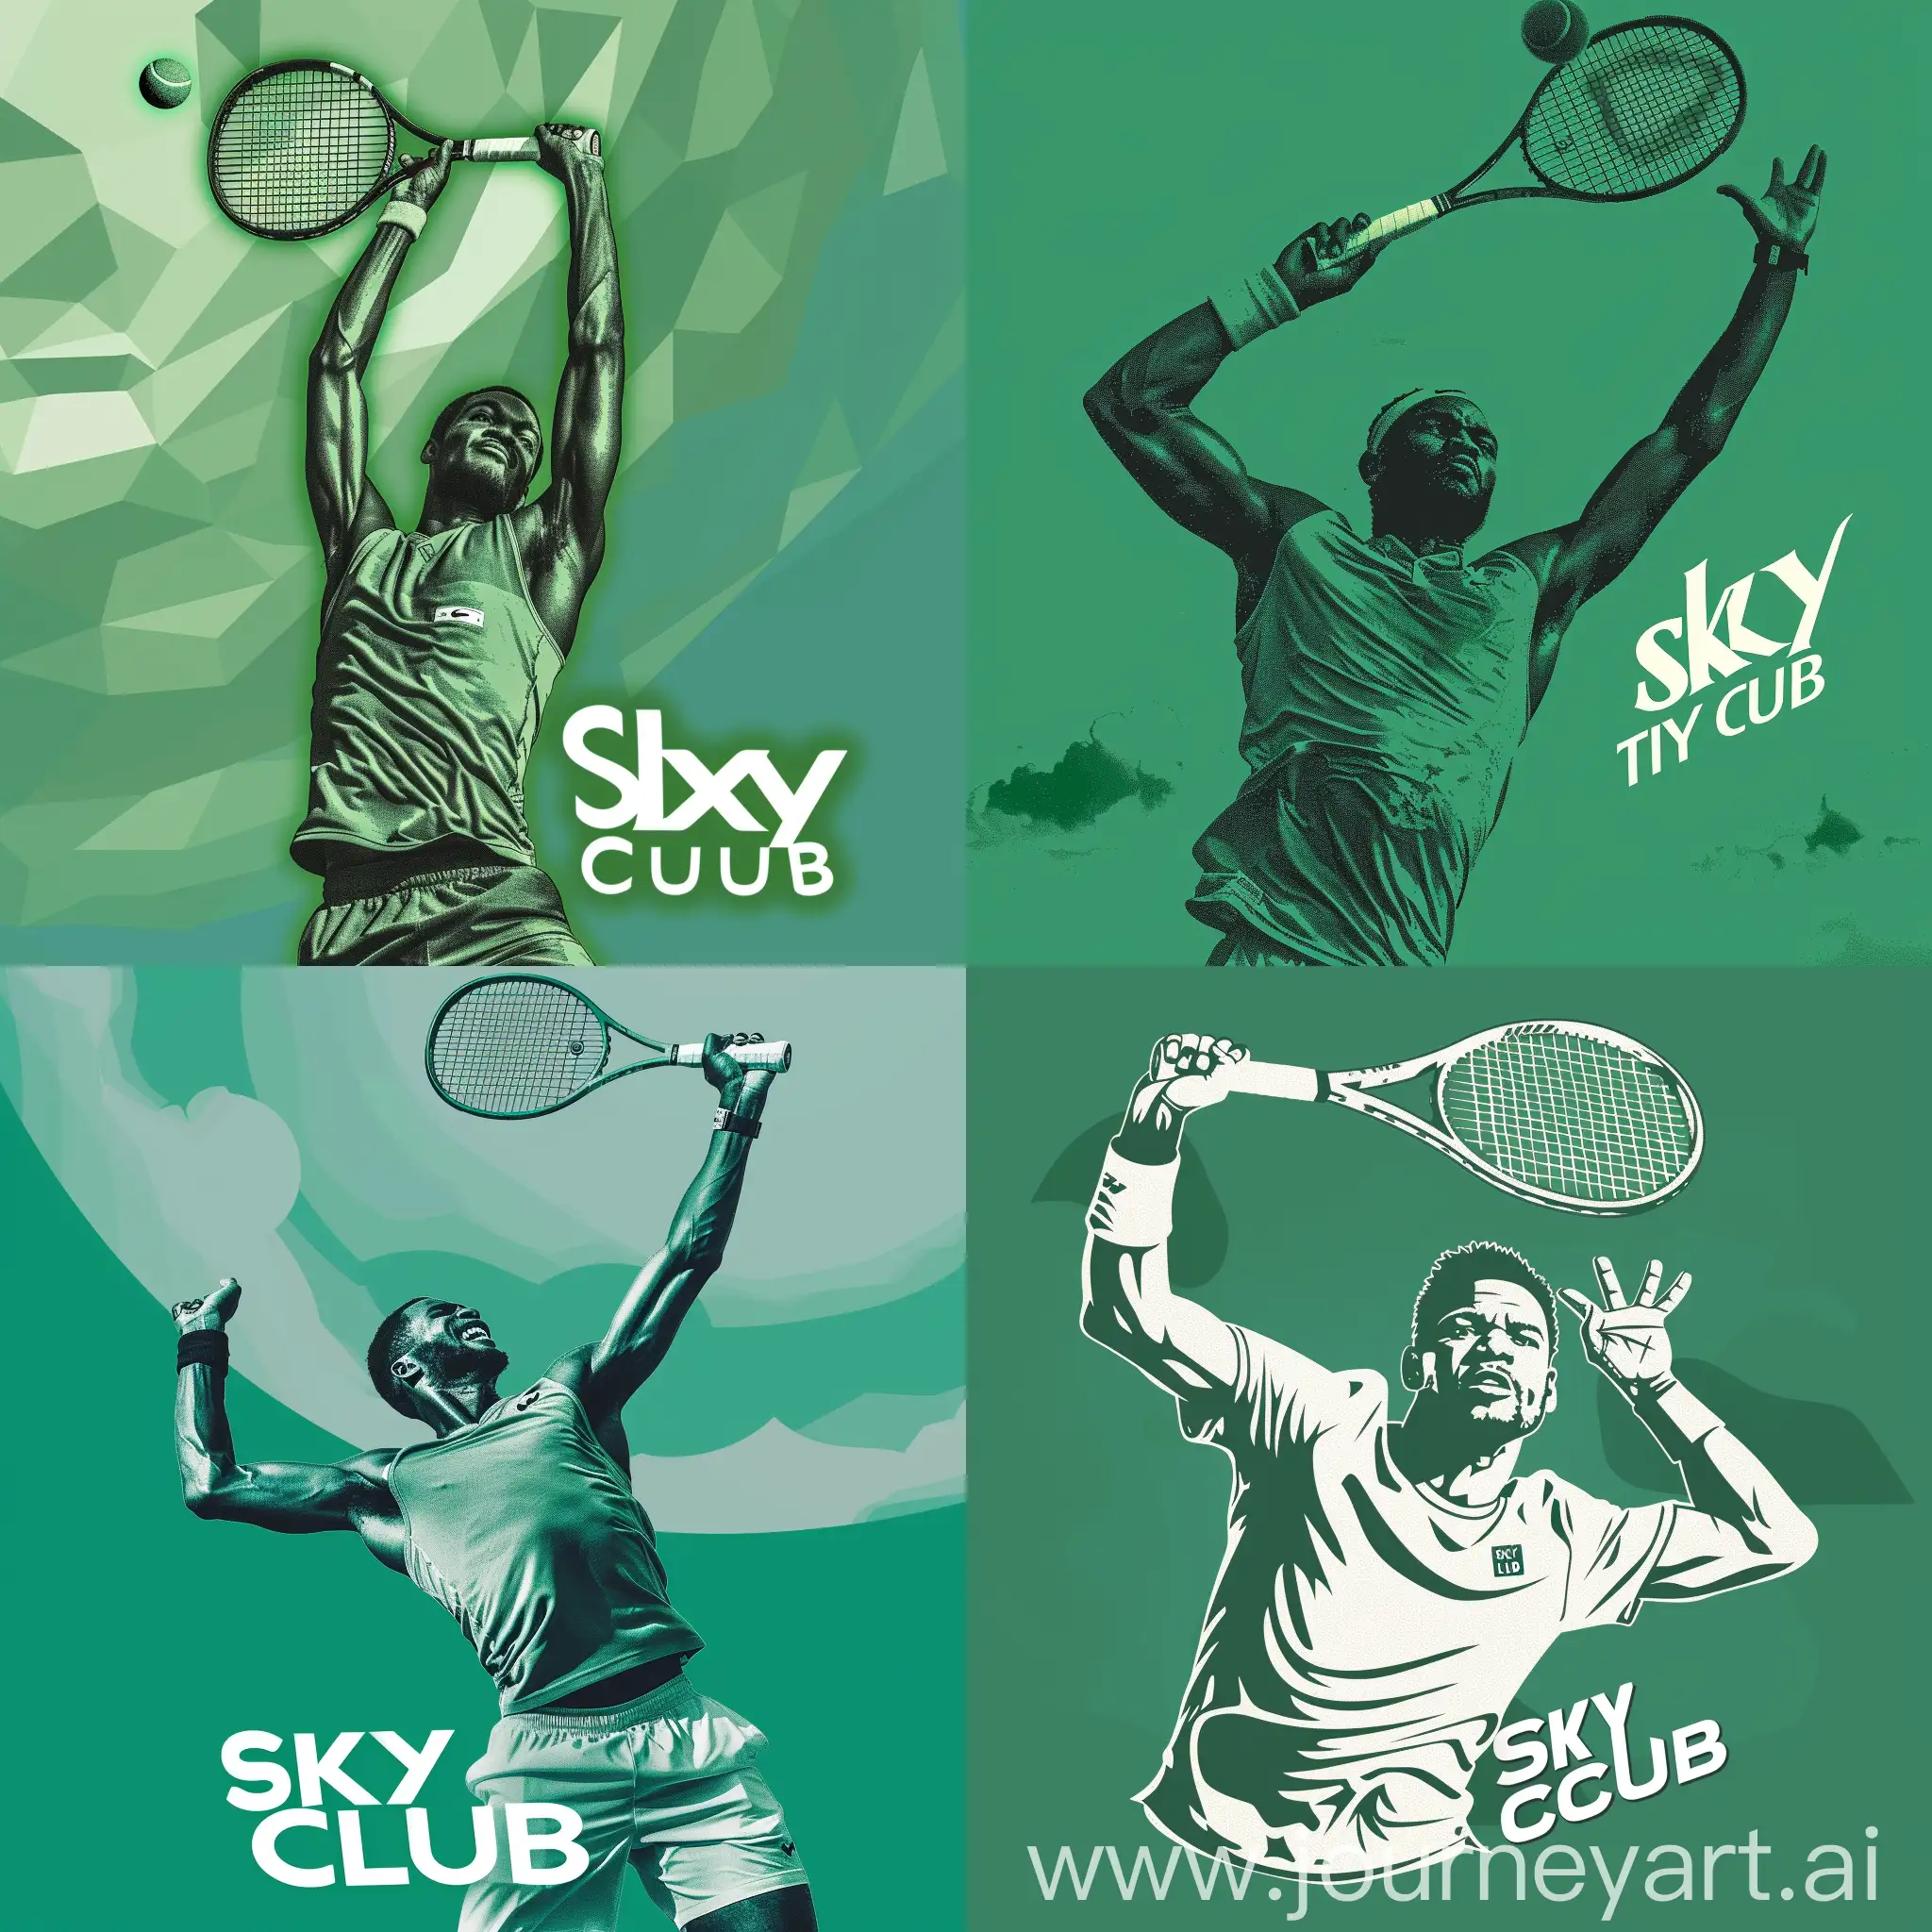 Dynamic-African-Male-Tennis-Player-in-Action-Green-Sky-Tennis-Club-Logo